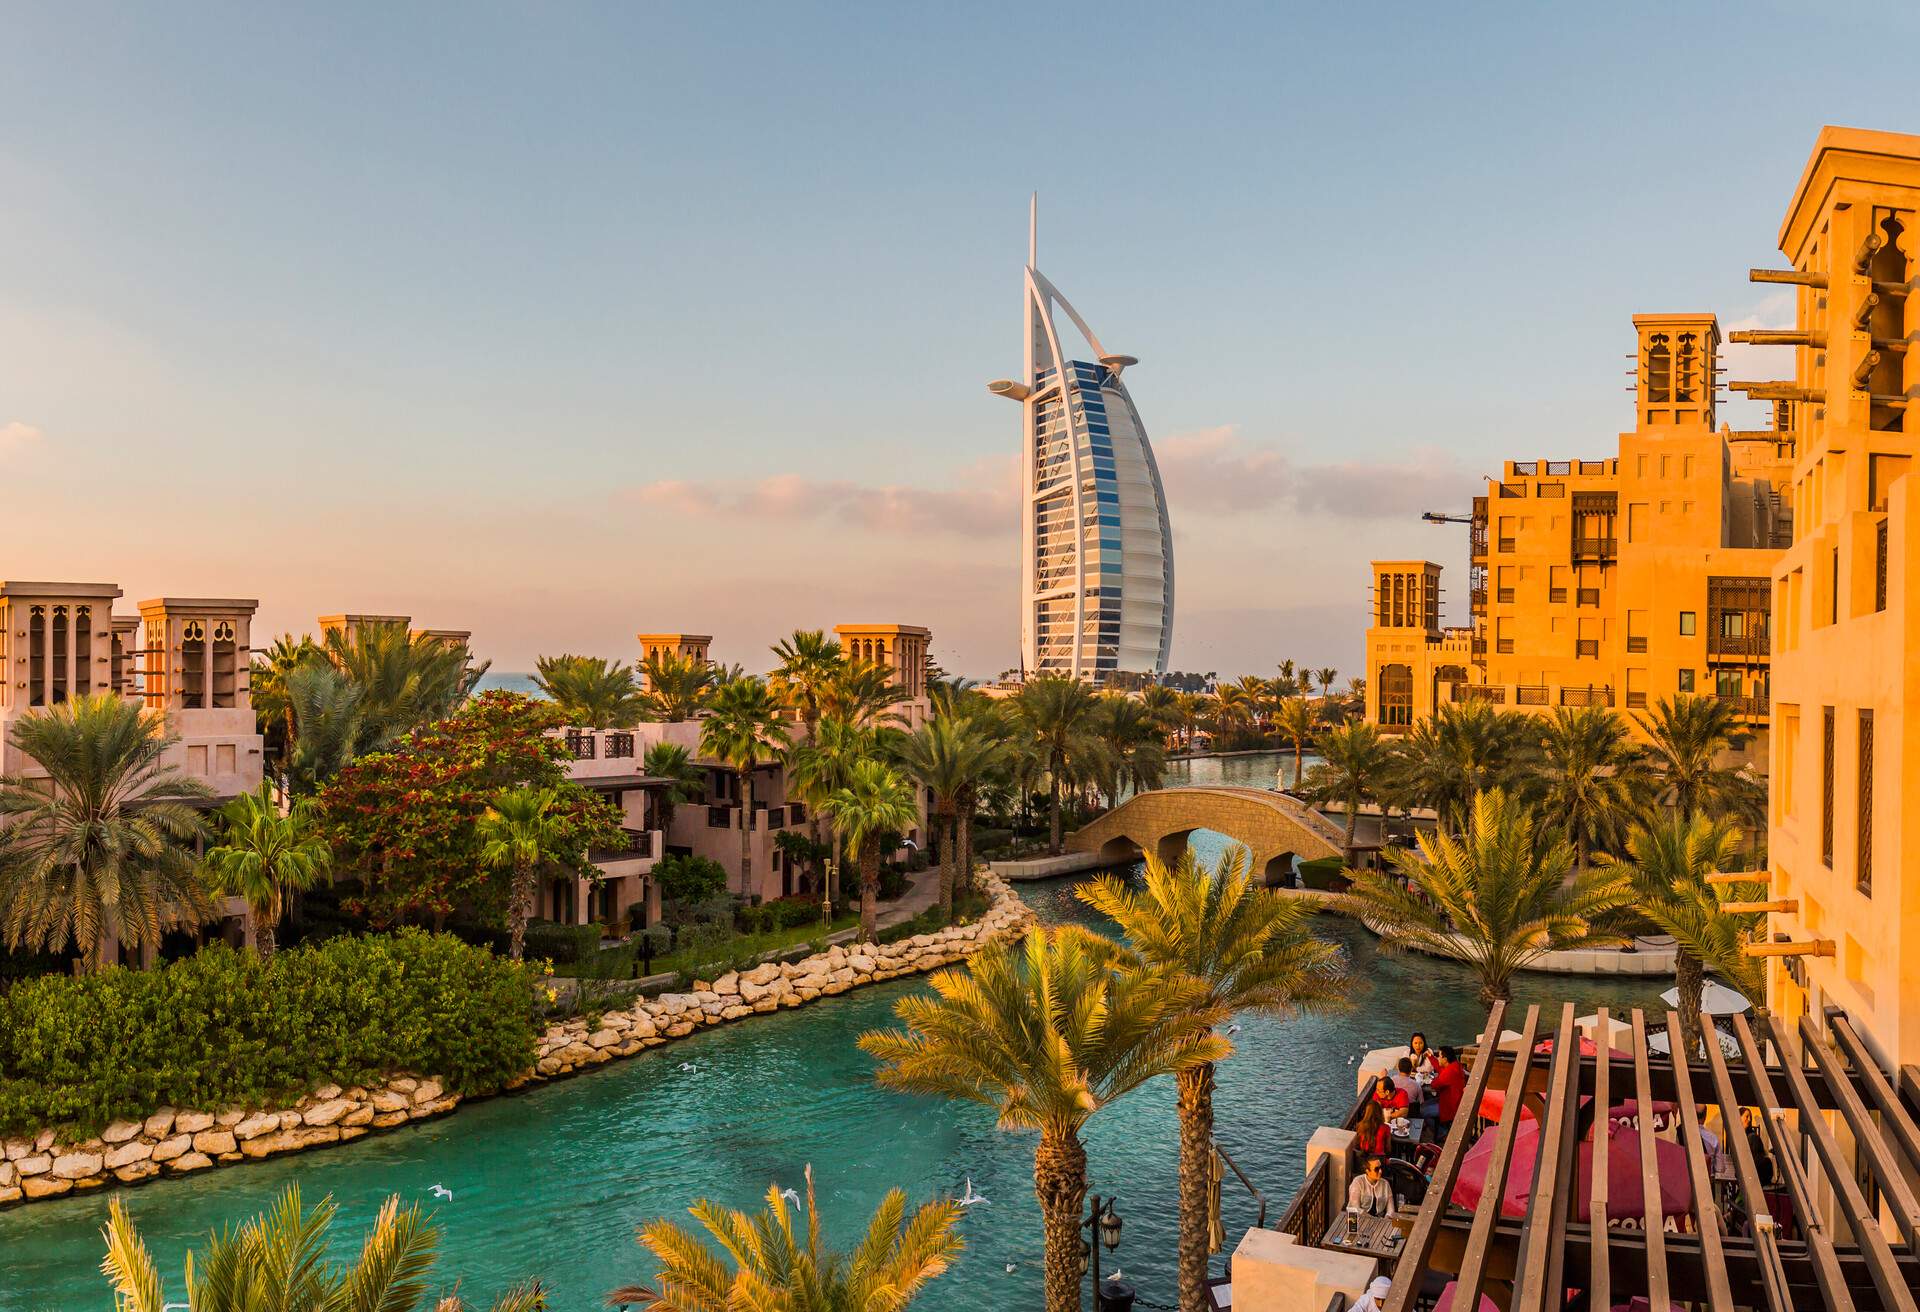 A water canal across a neighbourhood of Arab structures with wind towers and distant views of Burj Al Arab.